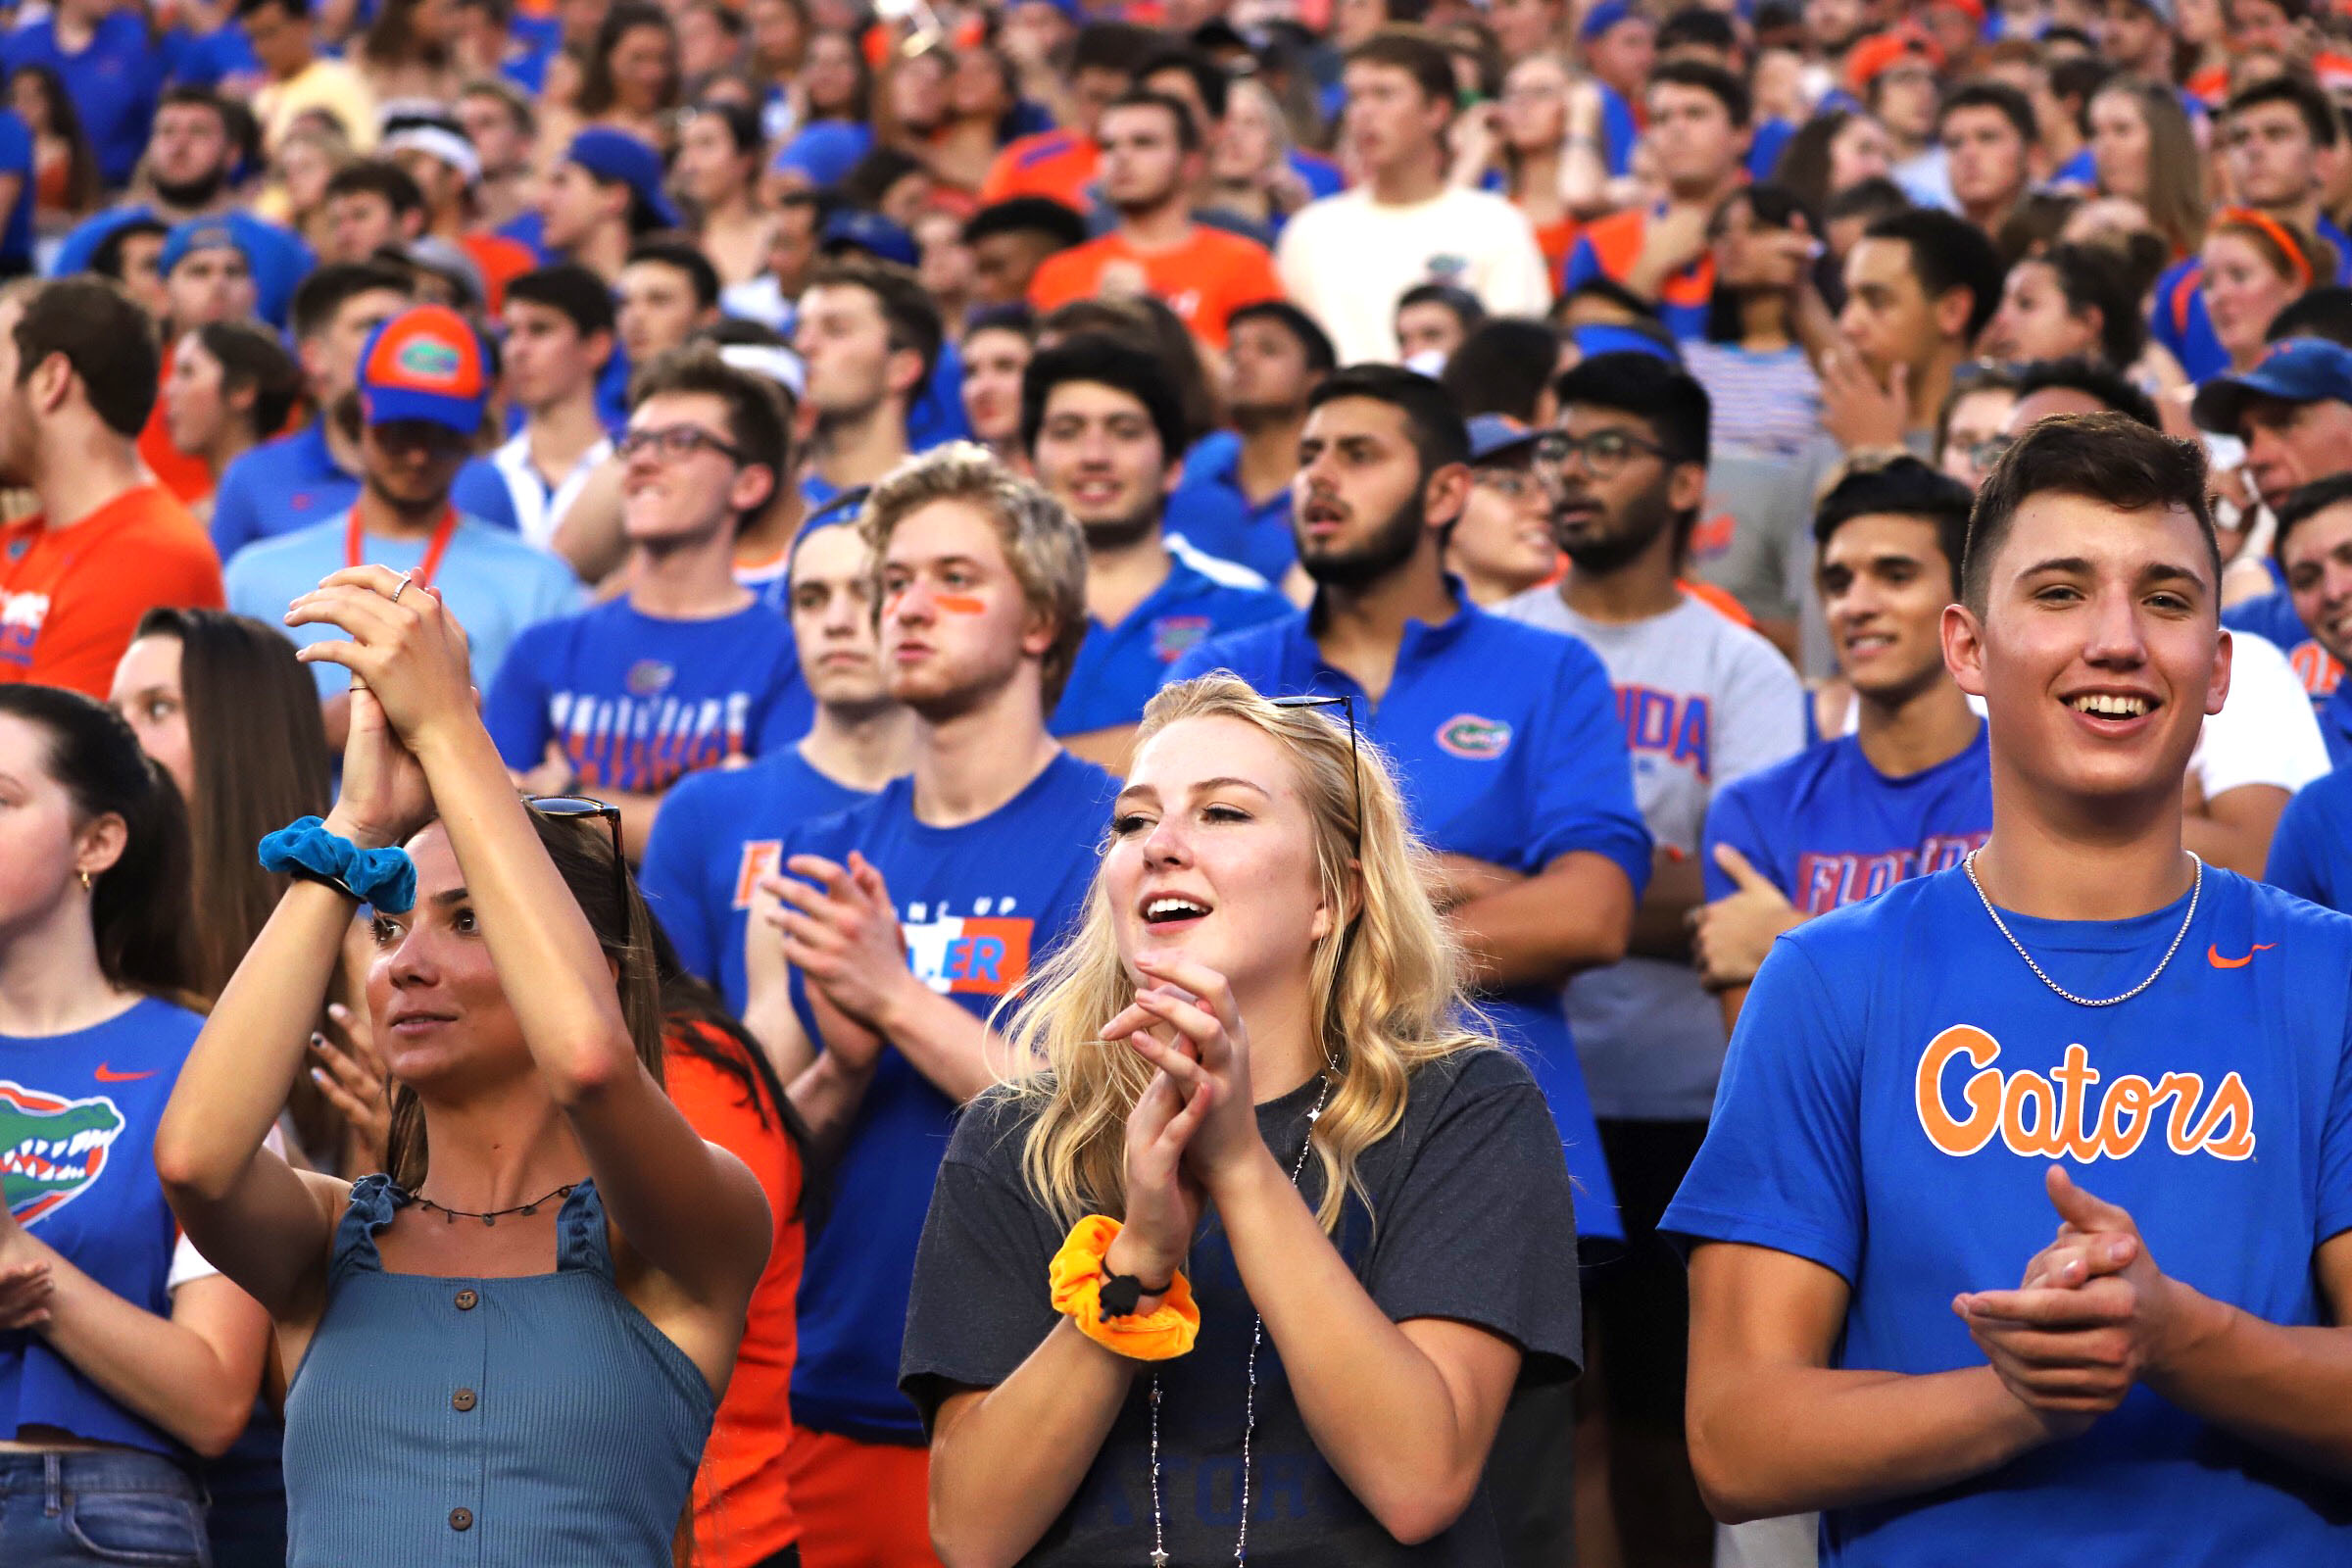 Student attend a football game in the swamp